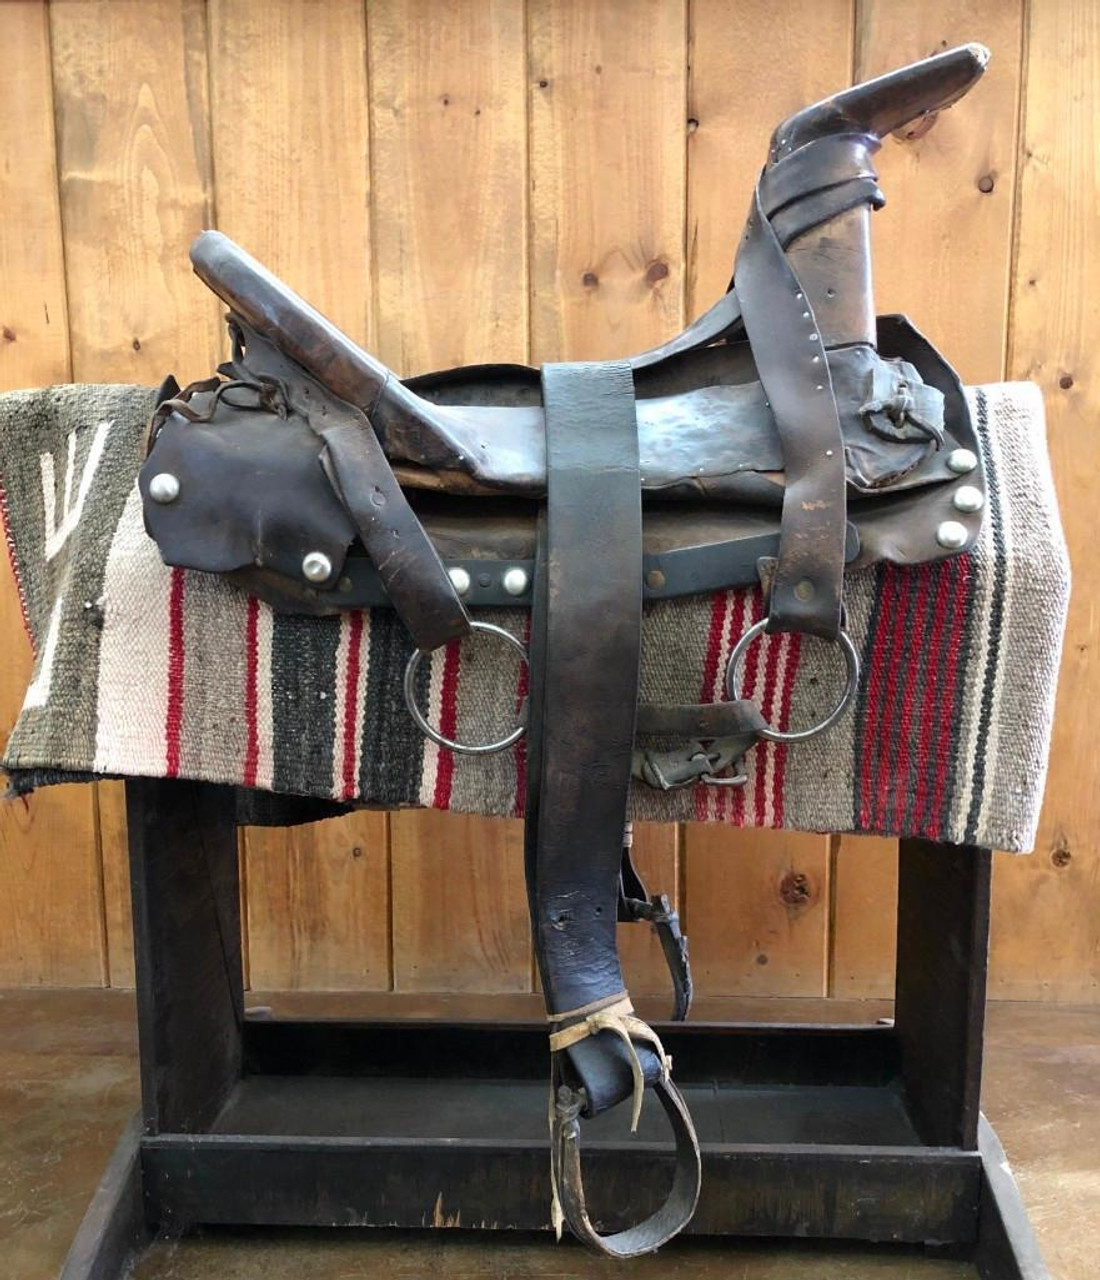 A Rare Example of a Native American Navajo Saddle - Late 1800s.